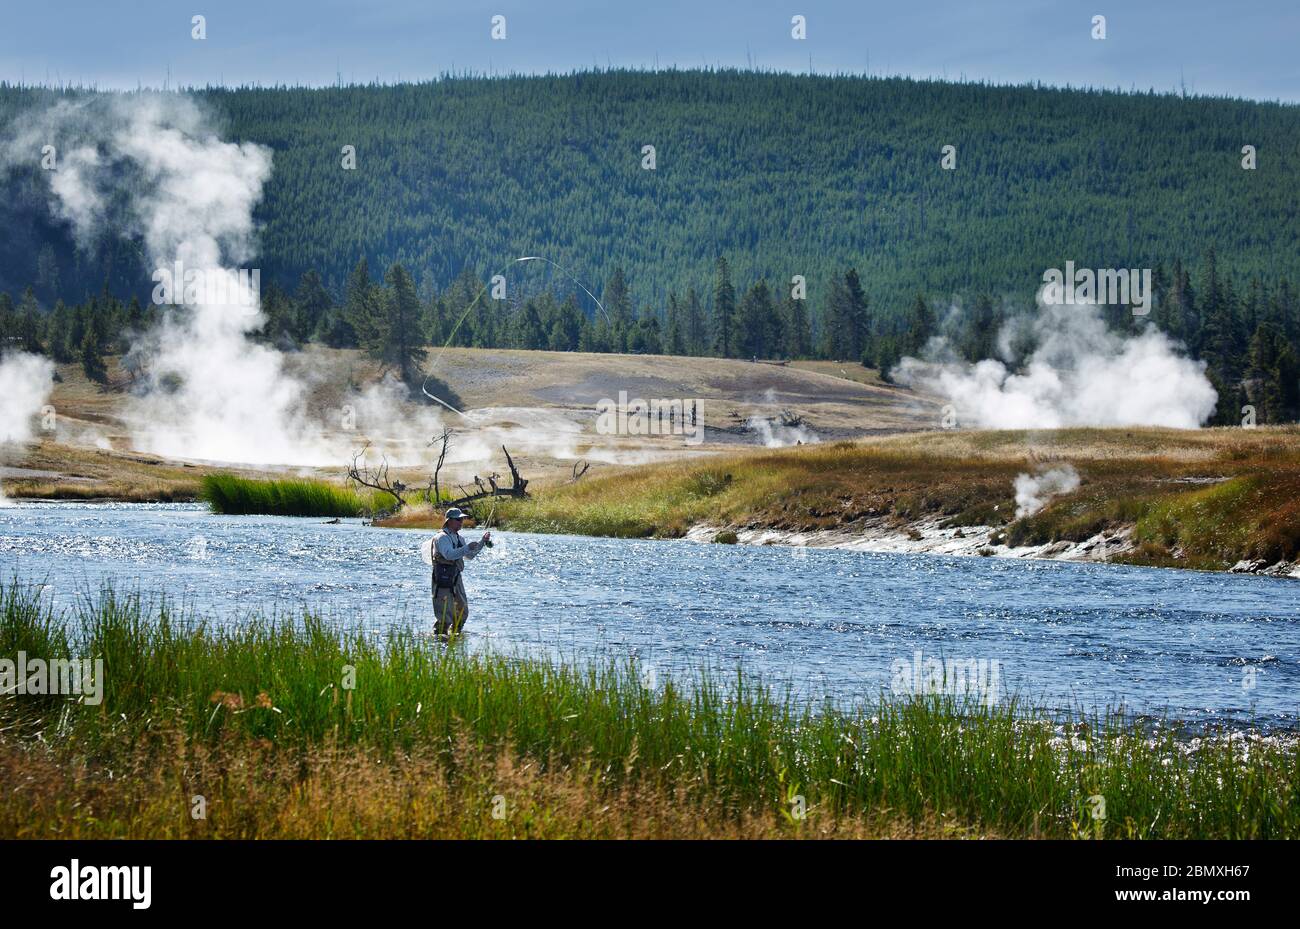 Fly fishing on the firehole river Stock Photo